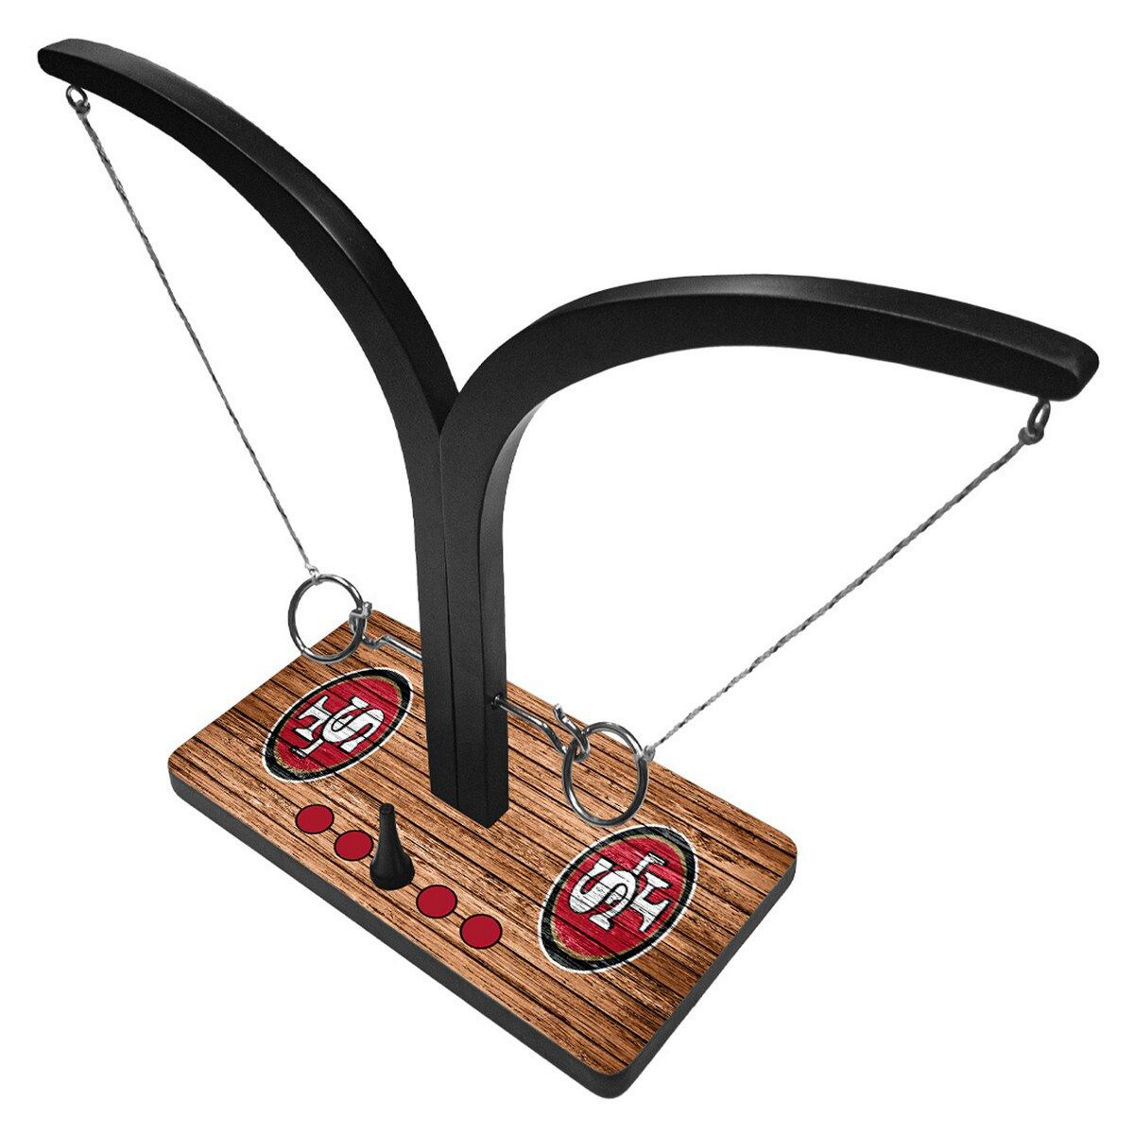 Victory Tailgate San Francisco 49ers Battle Hook and Ring Game Set - Image 2 of 2